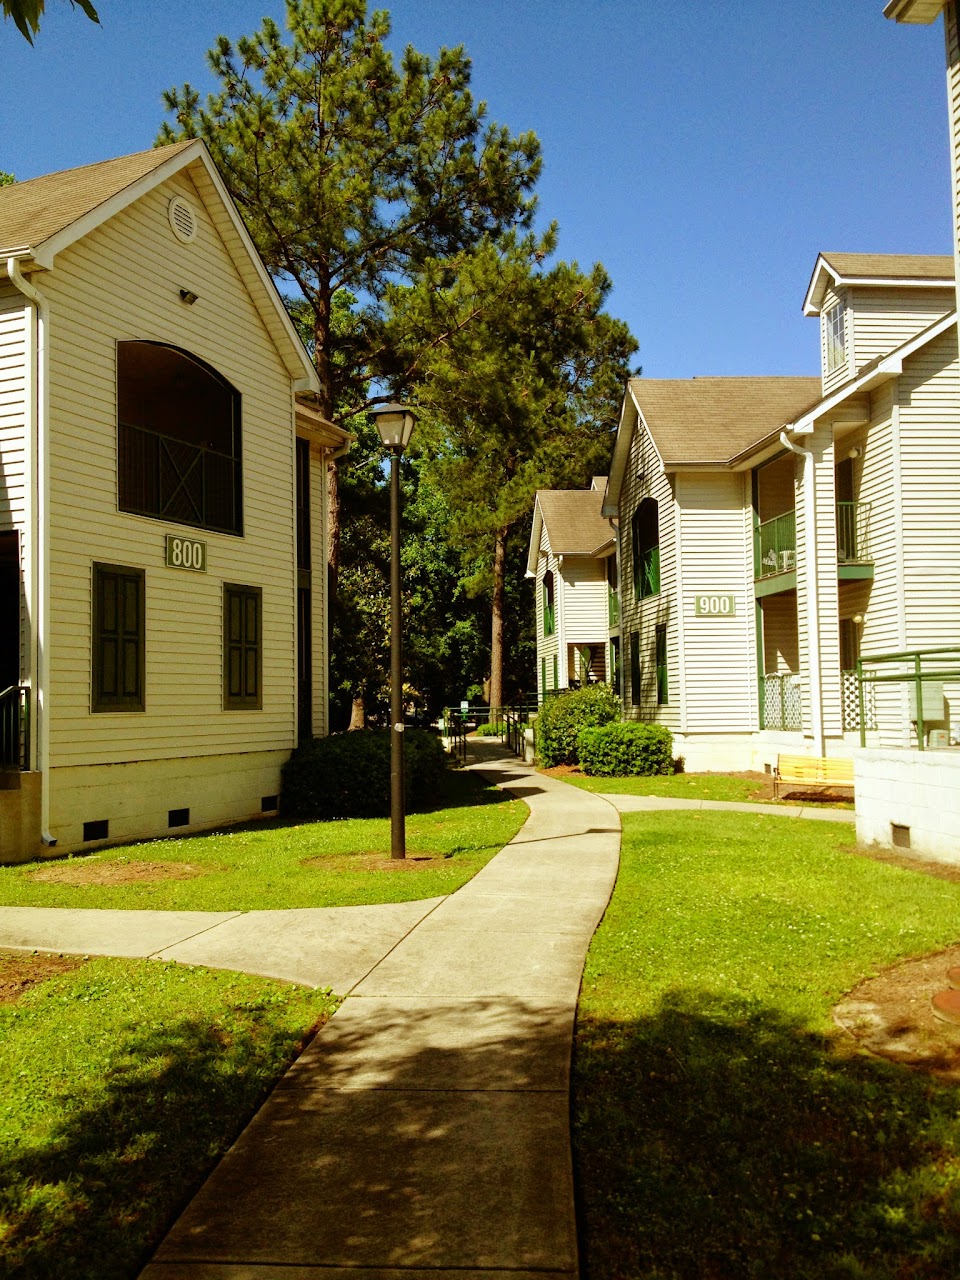 Photo of GRAND OAK APTS. Affordable housing located at 1830 MAGWOOD DR CHARLESTON, SC 29414